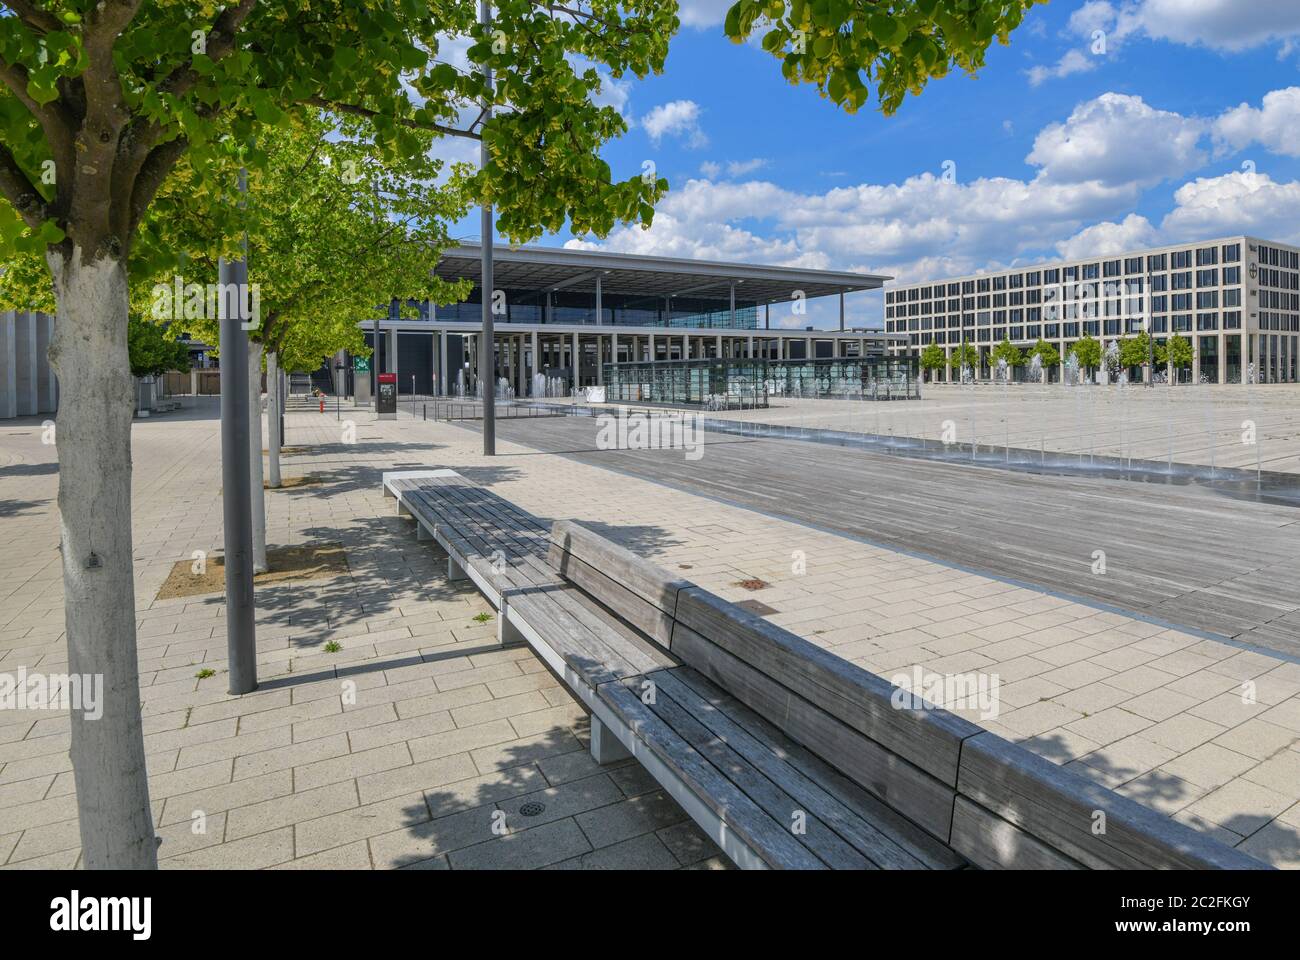 17 June 2020, Brandenburg, Schönefeld: Linden trees stand in front of the terminal of the capital airport Berlin Brandenburg Willy Brandt (BER). According to the operator, there is nothing to stop the planned opening of the new Capital Airport BER in October 2020. After years of delays, BER is scheduled to start operations at the end of October 2020. The operating company is owned by the states of Berlin and Brandenburg and the federal government. Photo: Patrick Pleul/dpa-Zentralbild/ZB Stock Photo